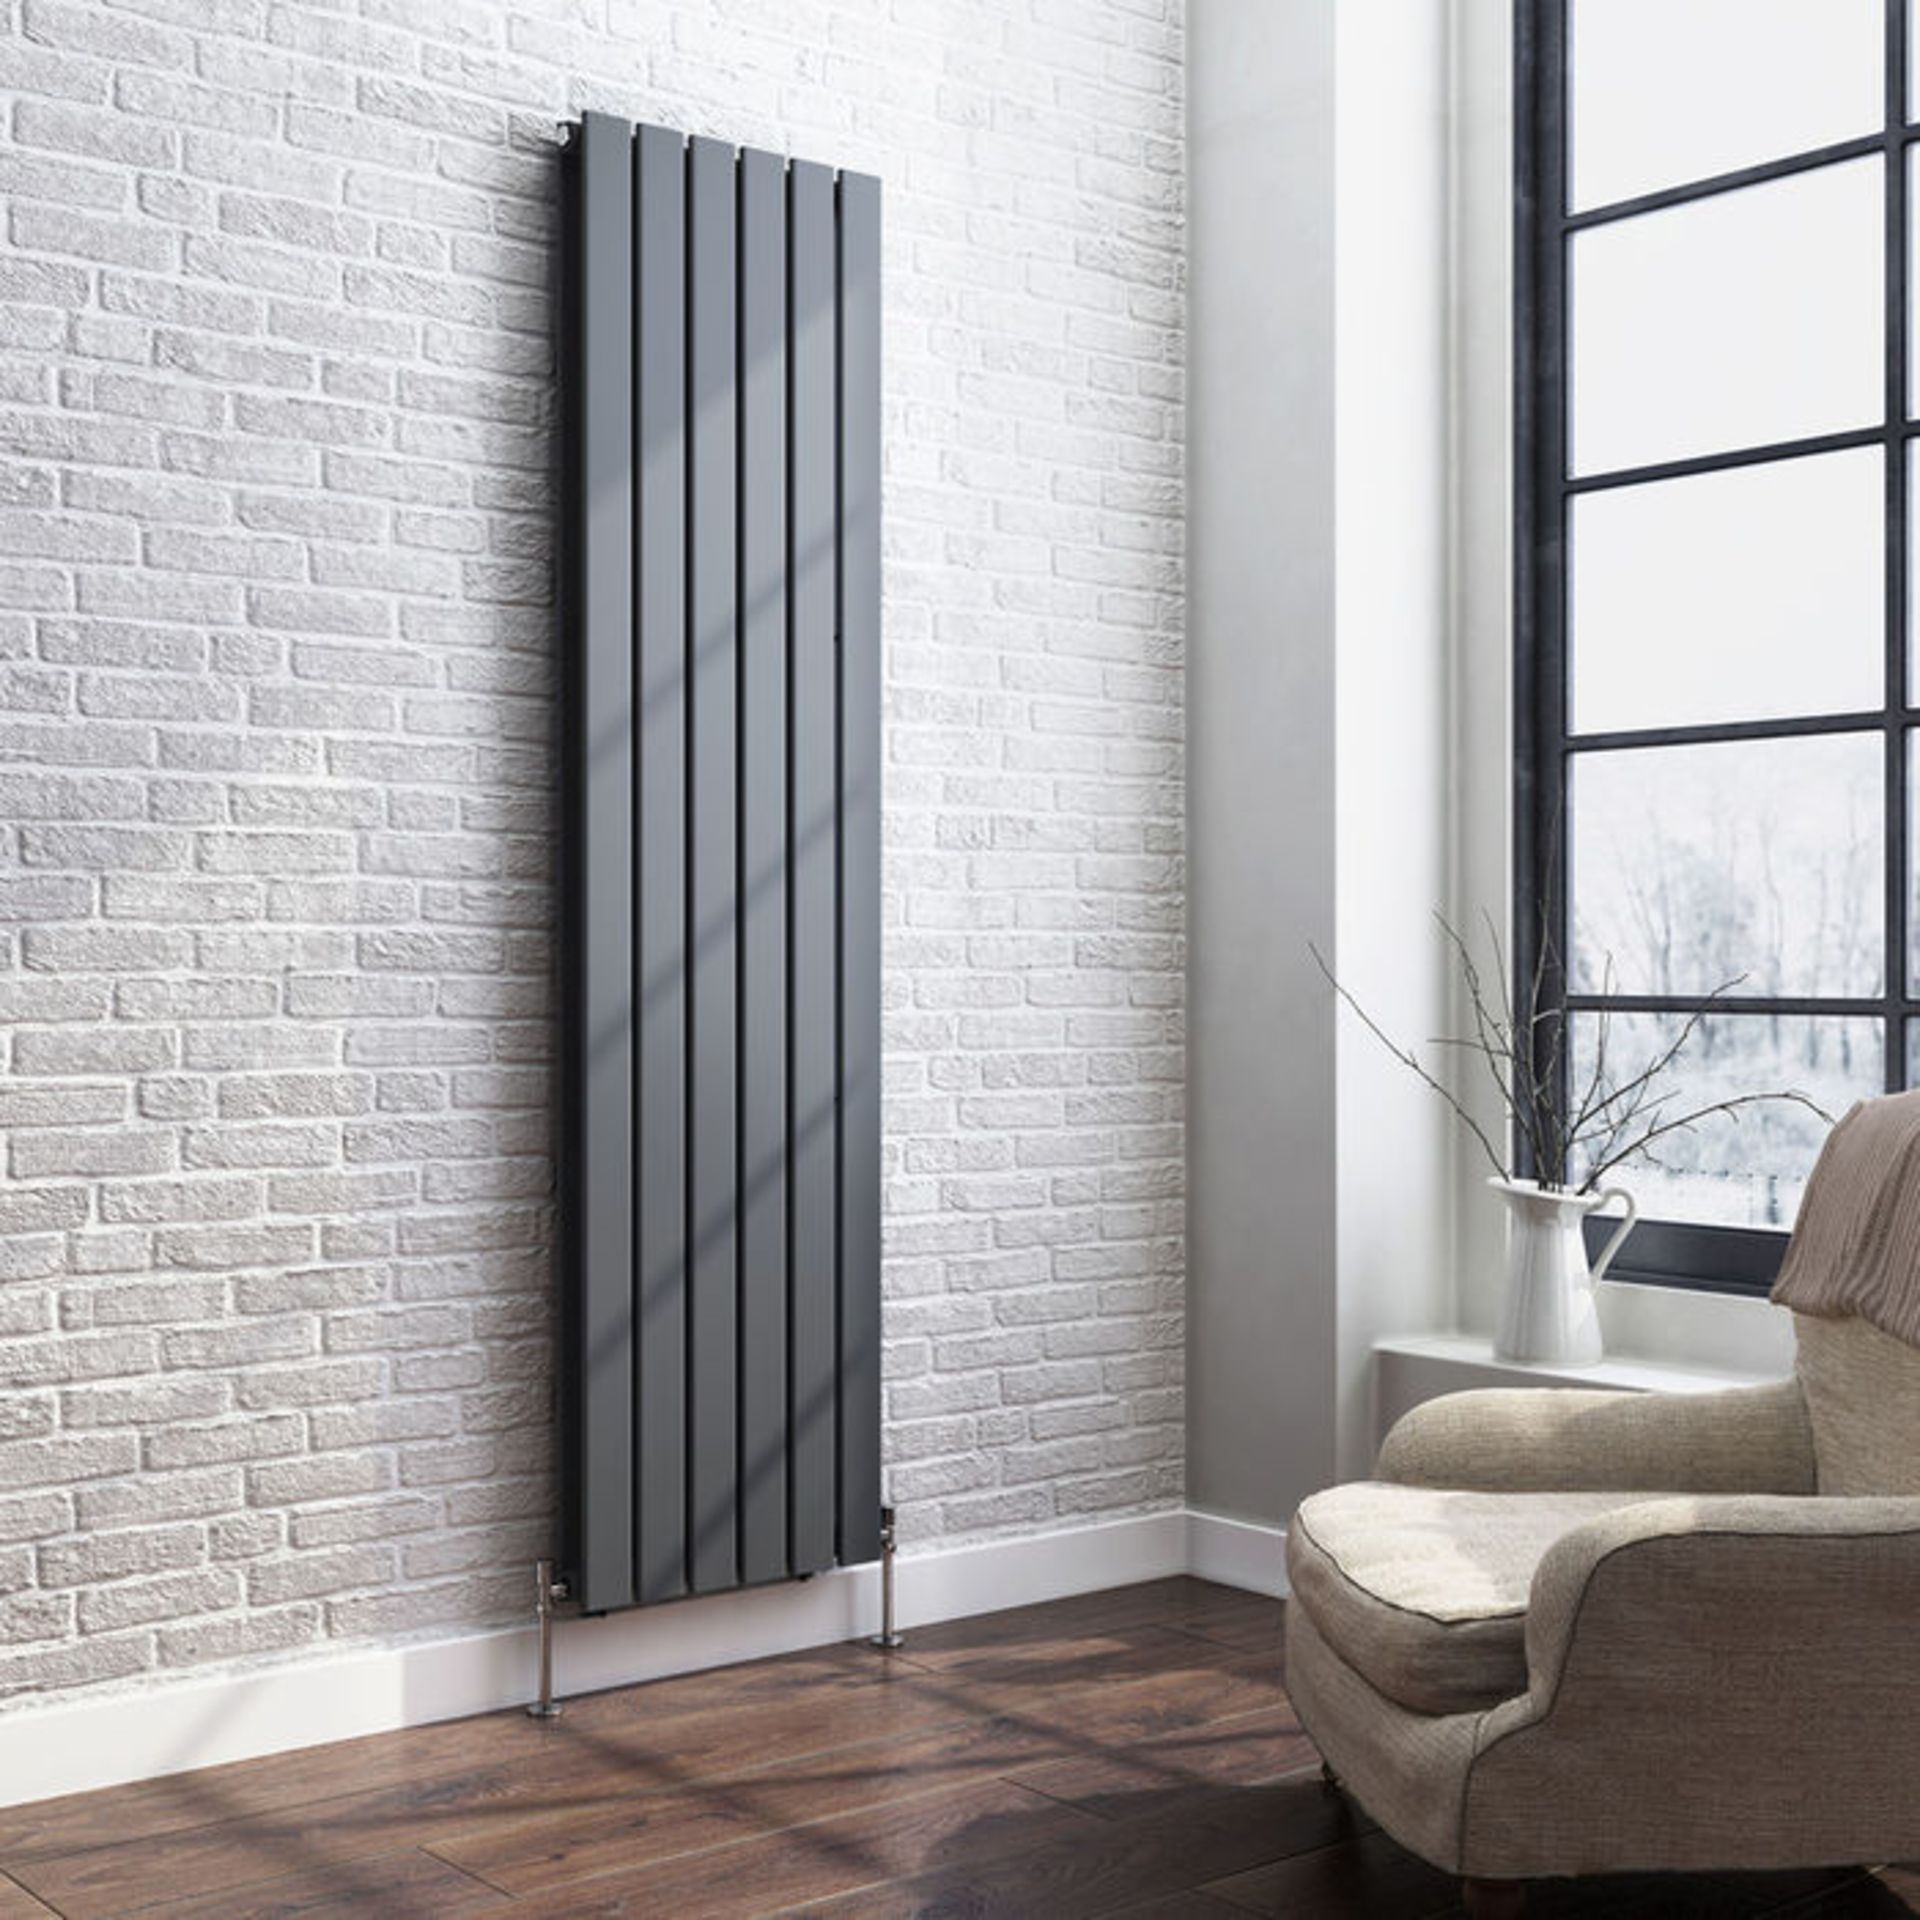 New 1800x532mm Anthracite Double Flat Panel Vertical Radiator.Rrp £499.99 Each.RC264.Made With Low - Image 2 of 2